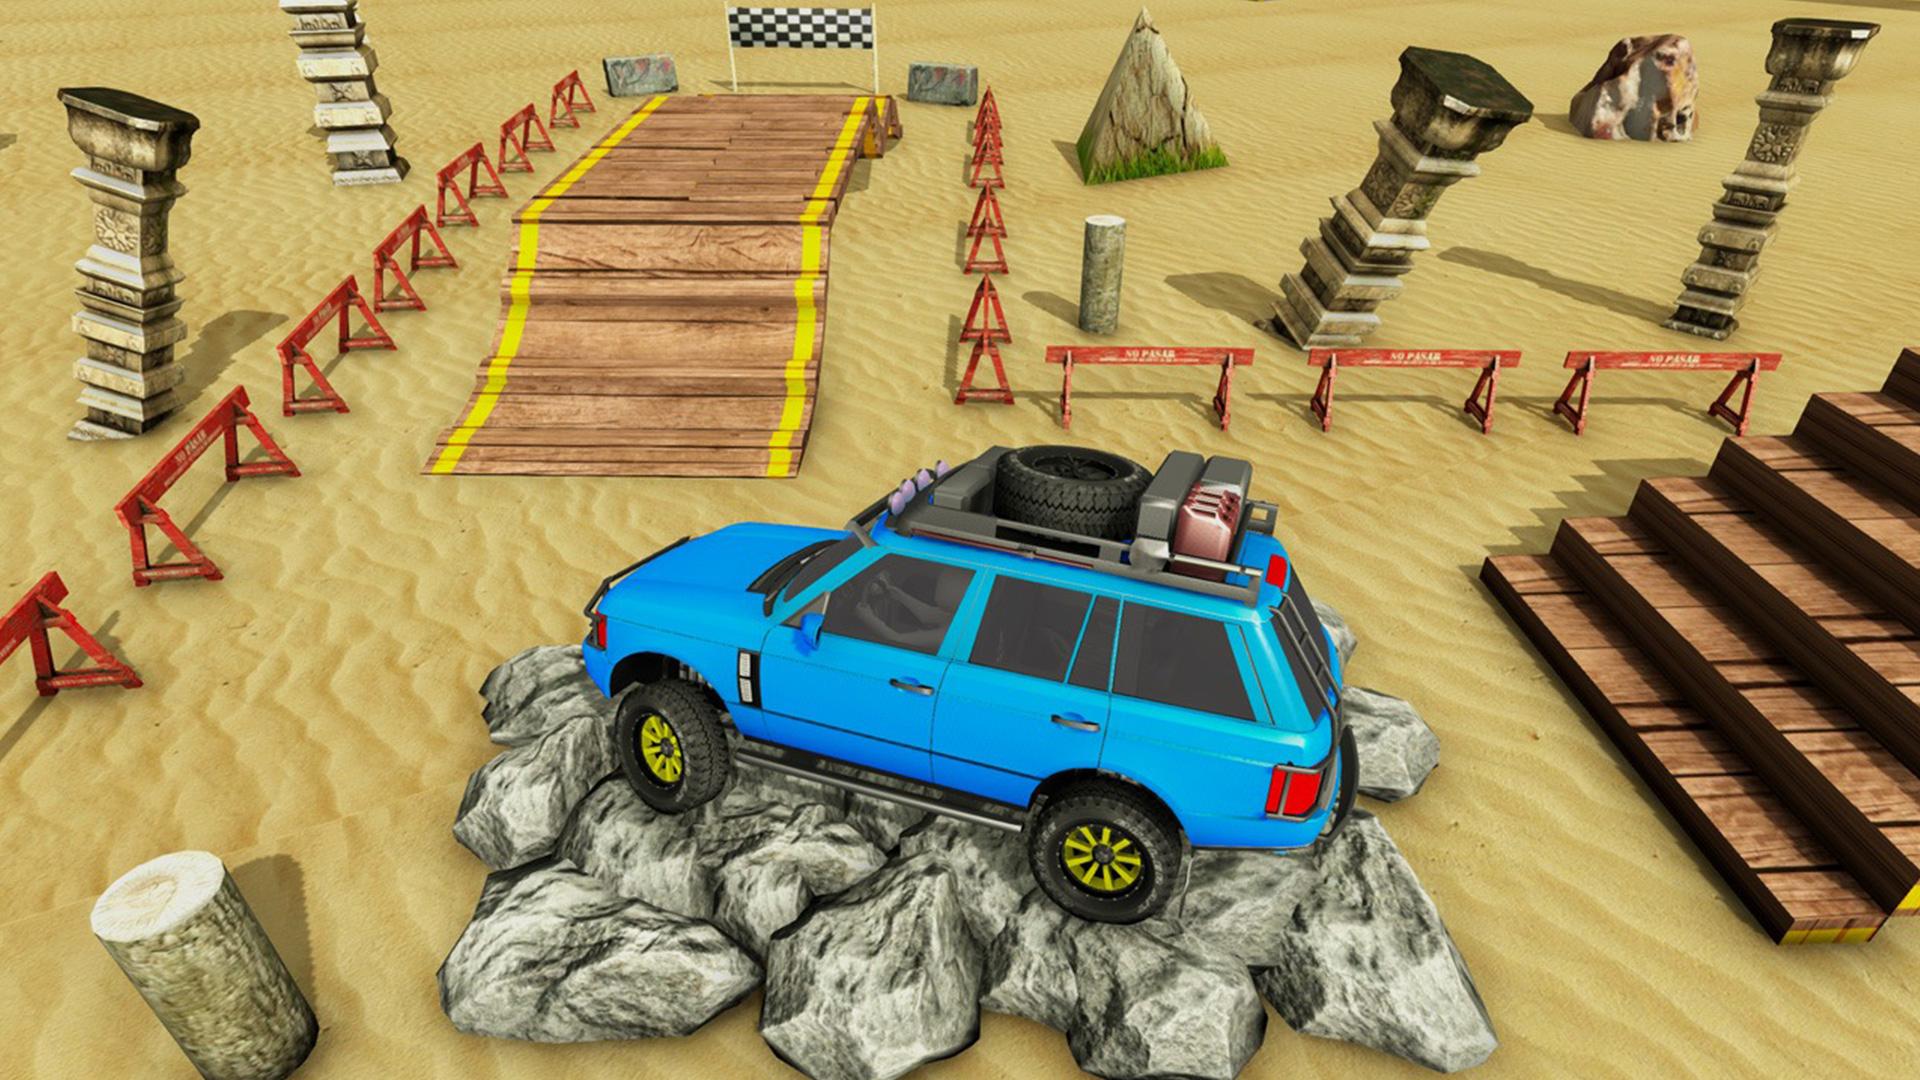 Offroad car driving game все открыта. 4x4 off Road игра. Offroad car Driving game. Взломанная игра Offroad car Driving game.